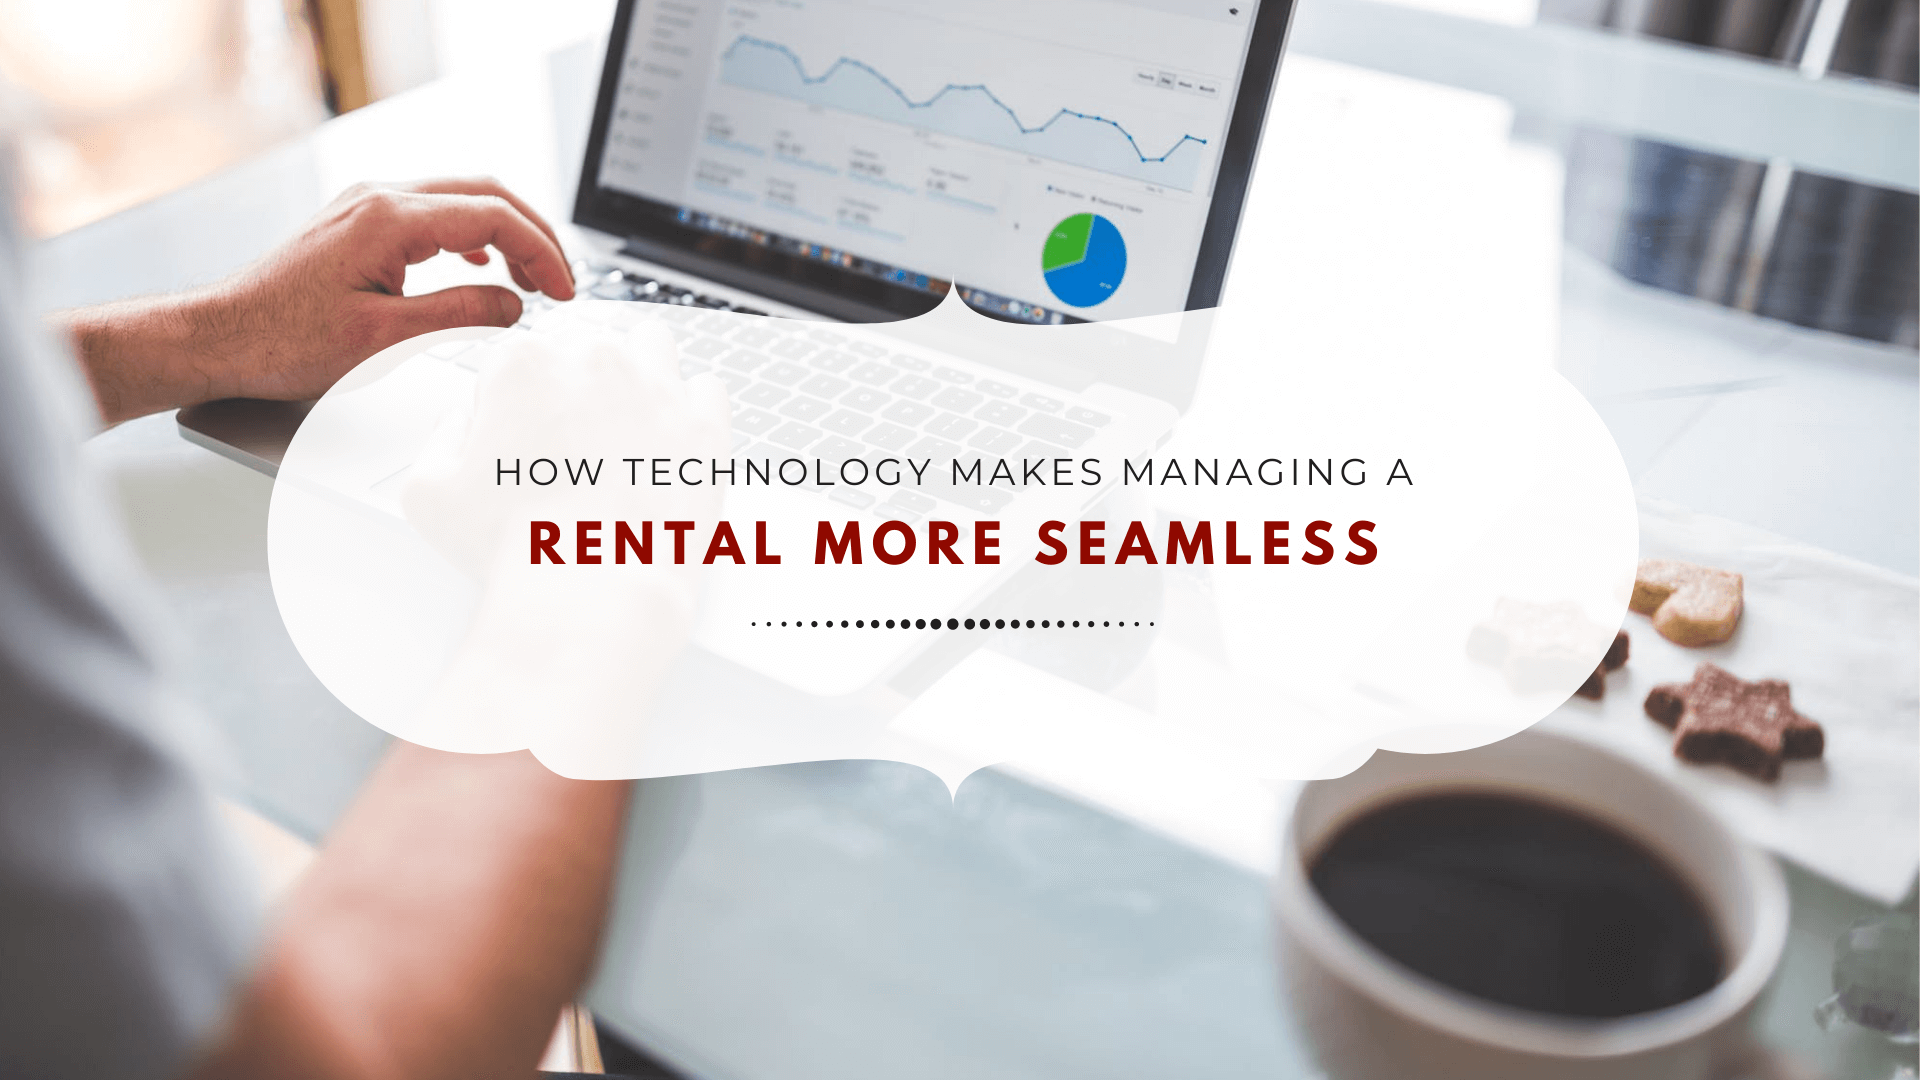 How Technology Makes Managing a Rental Property More Seamless - article banner